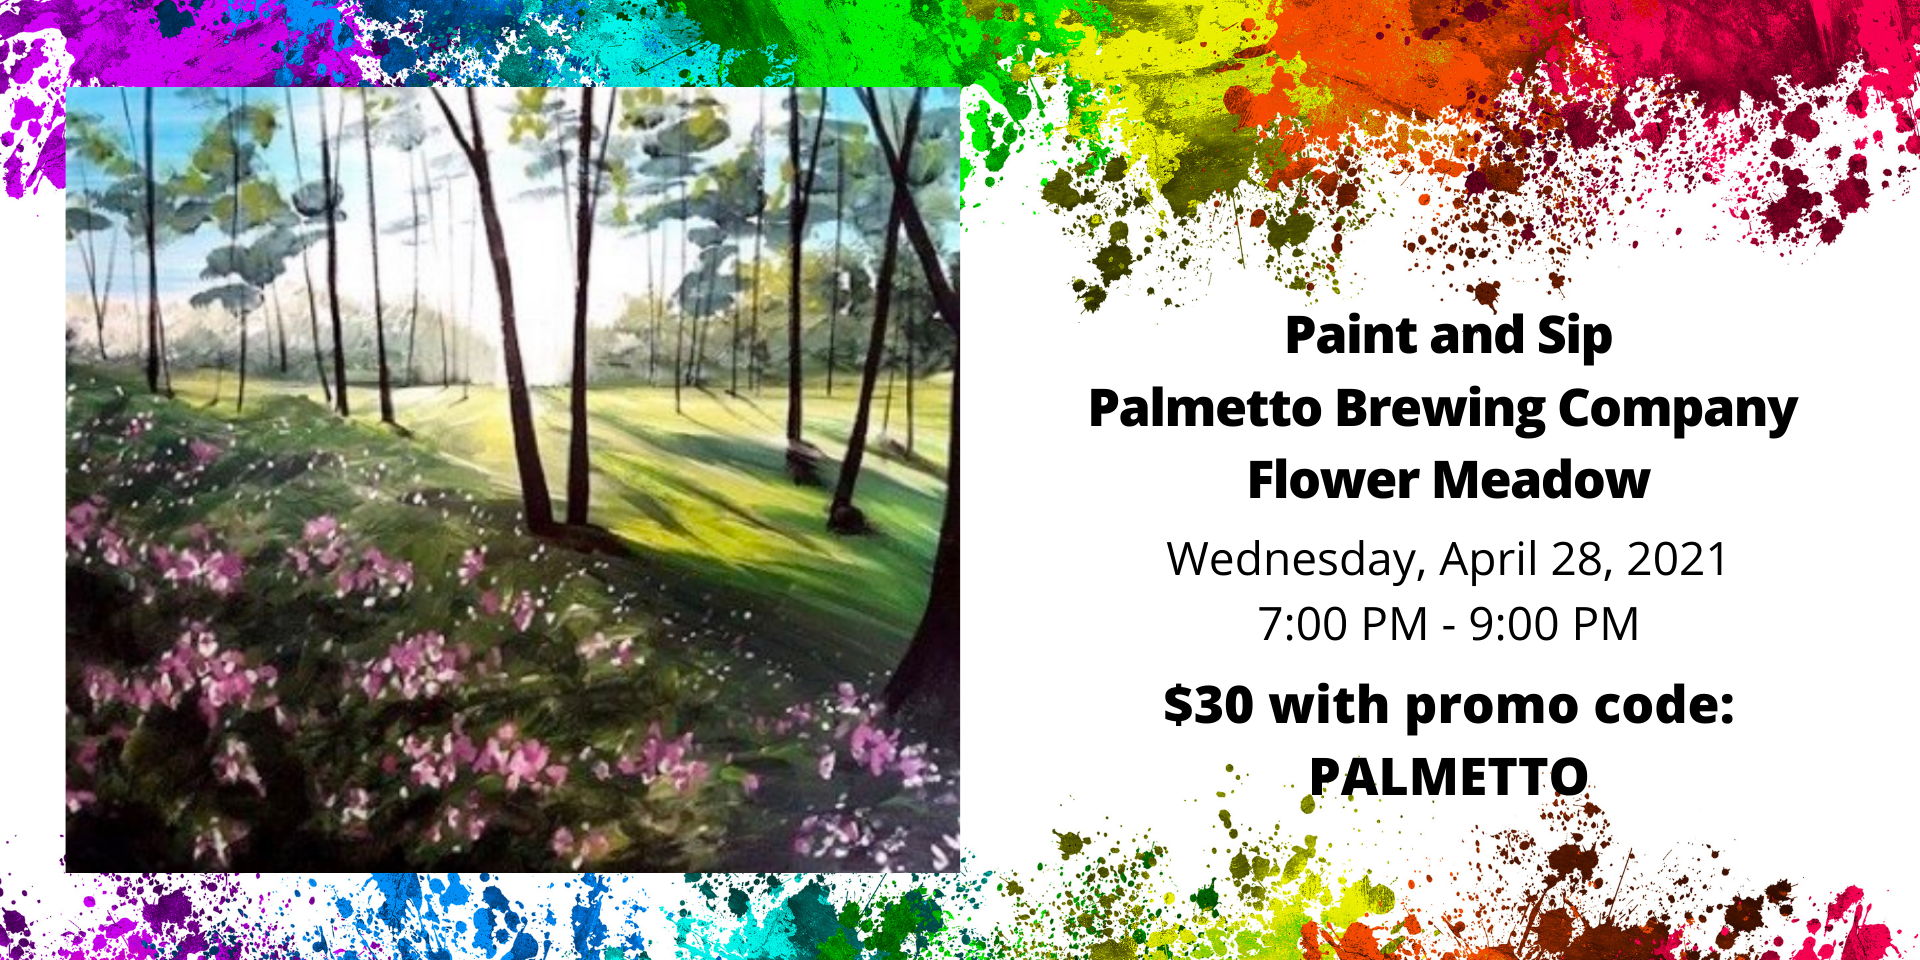 Paint and Sip @ Palmetto Brewing Co: Flower Meadow ($30) promotional image